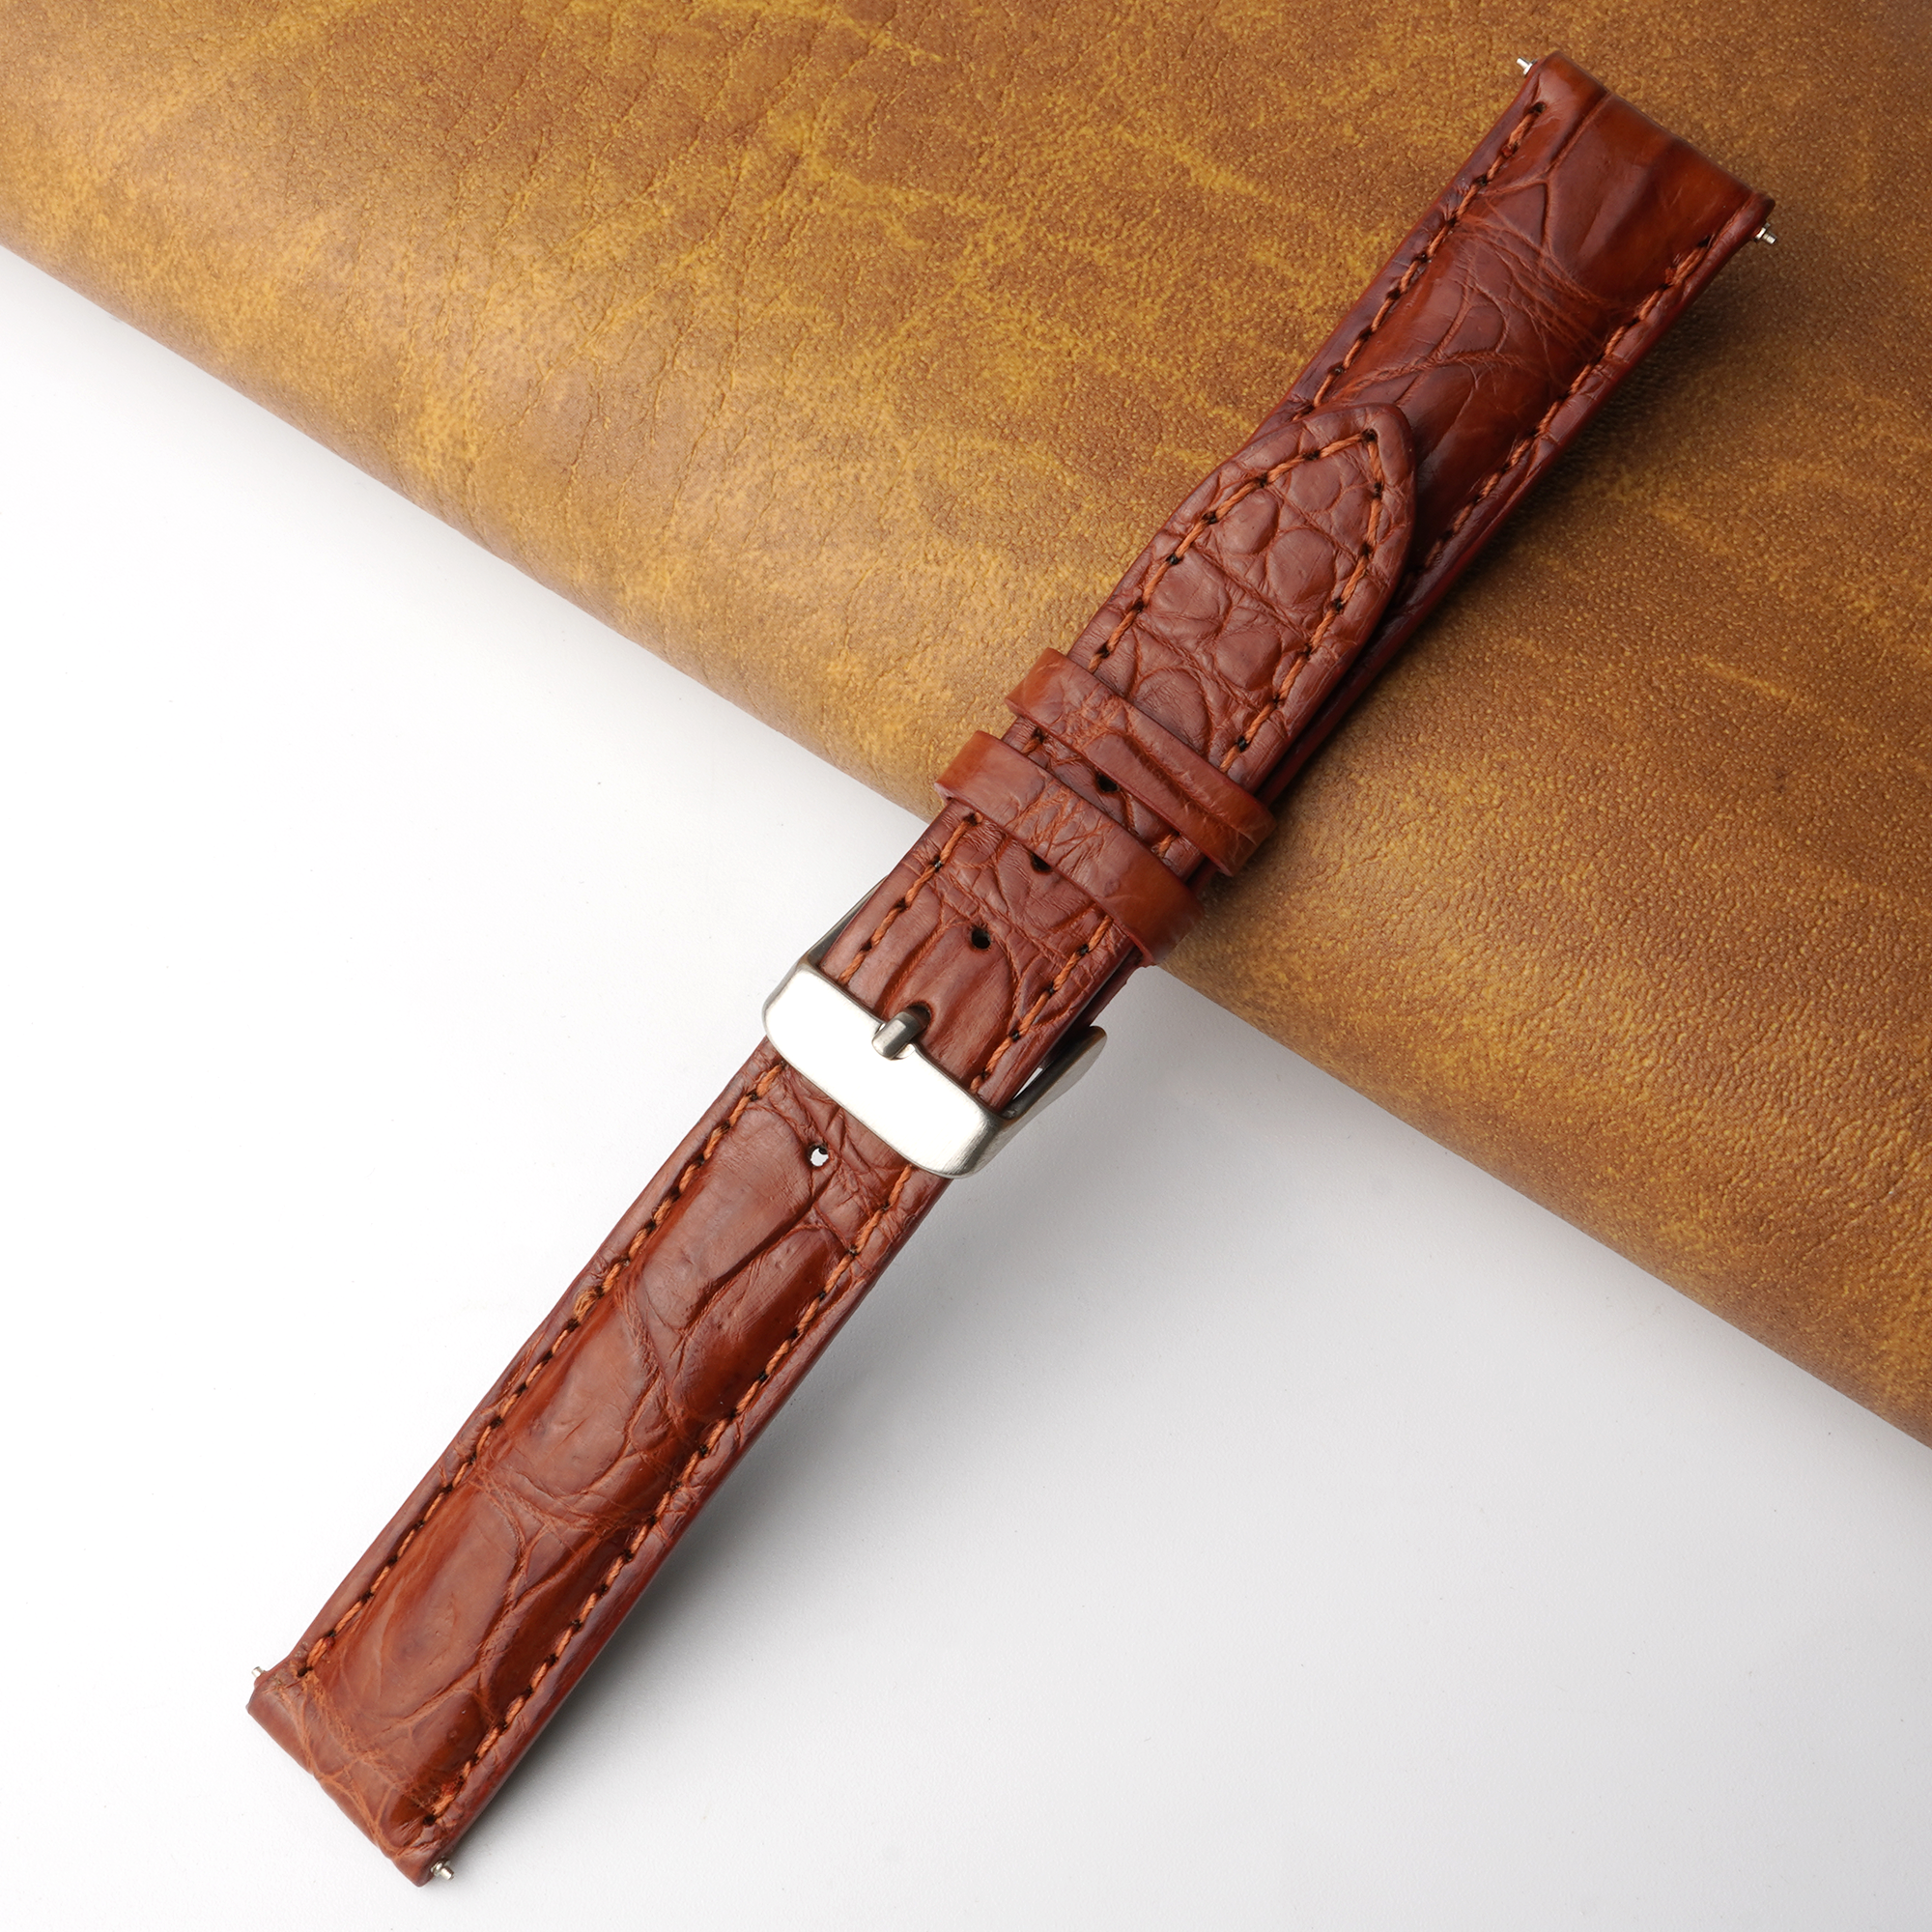 18mm Brown Unique Pattern Alligator Leather Watch Band For Men DH-227B